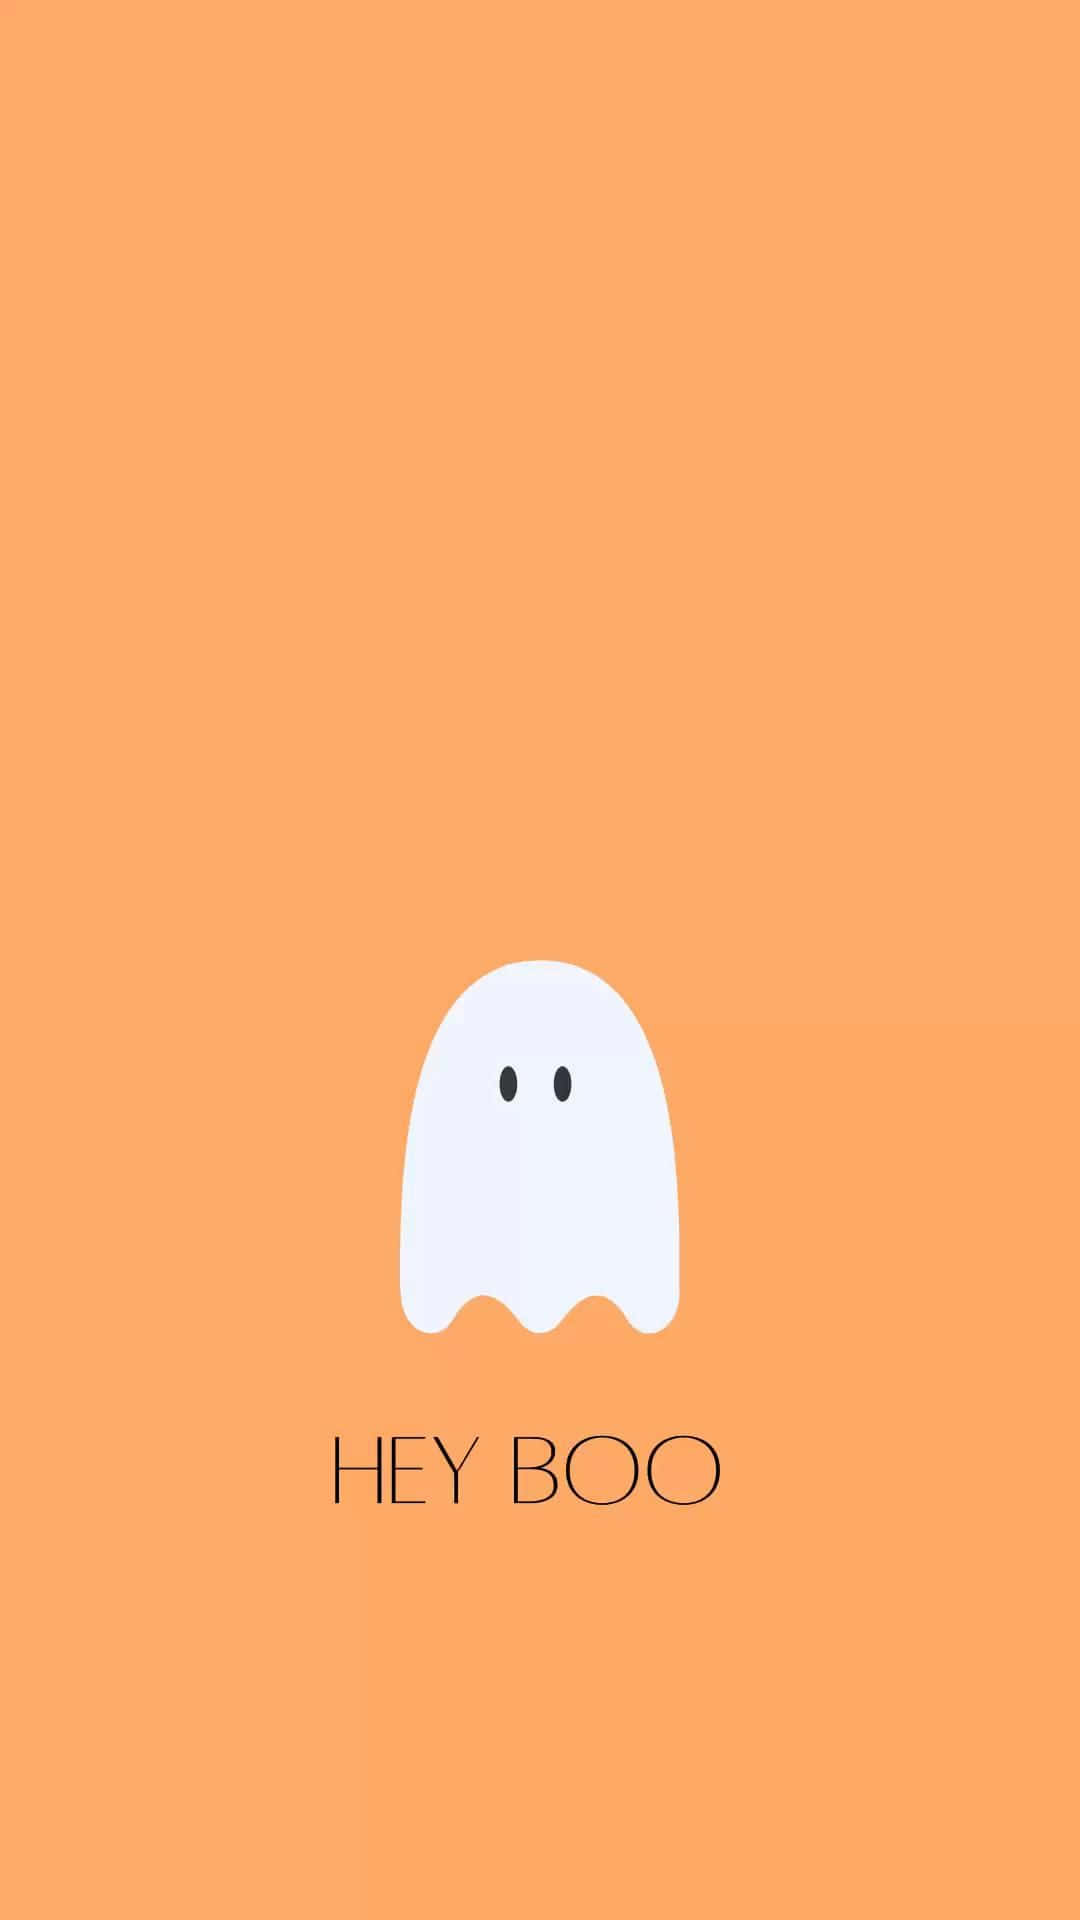 Download Hey Boo And Stuff Wallpaper | Wallpapers.com